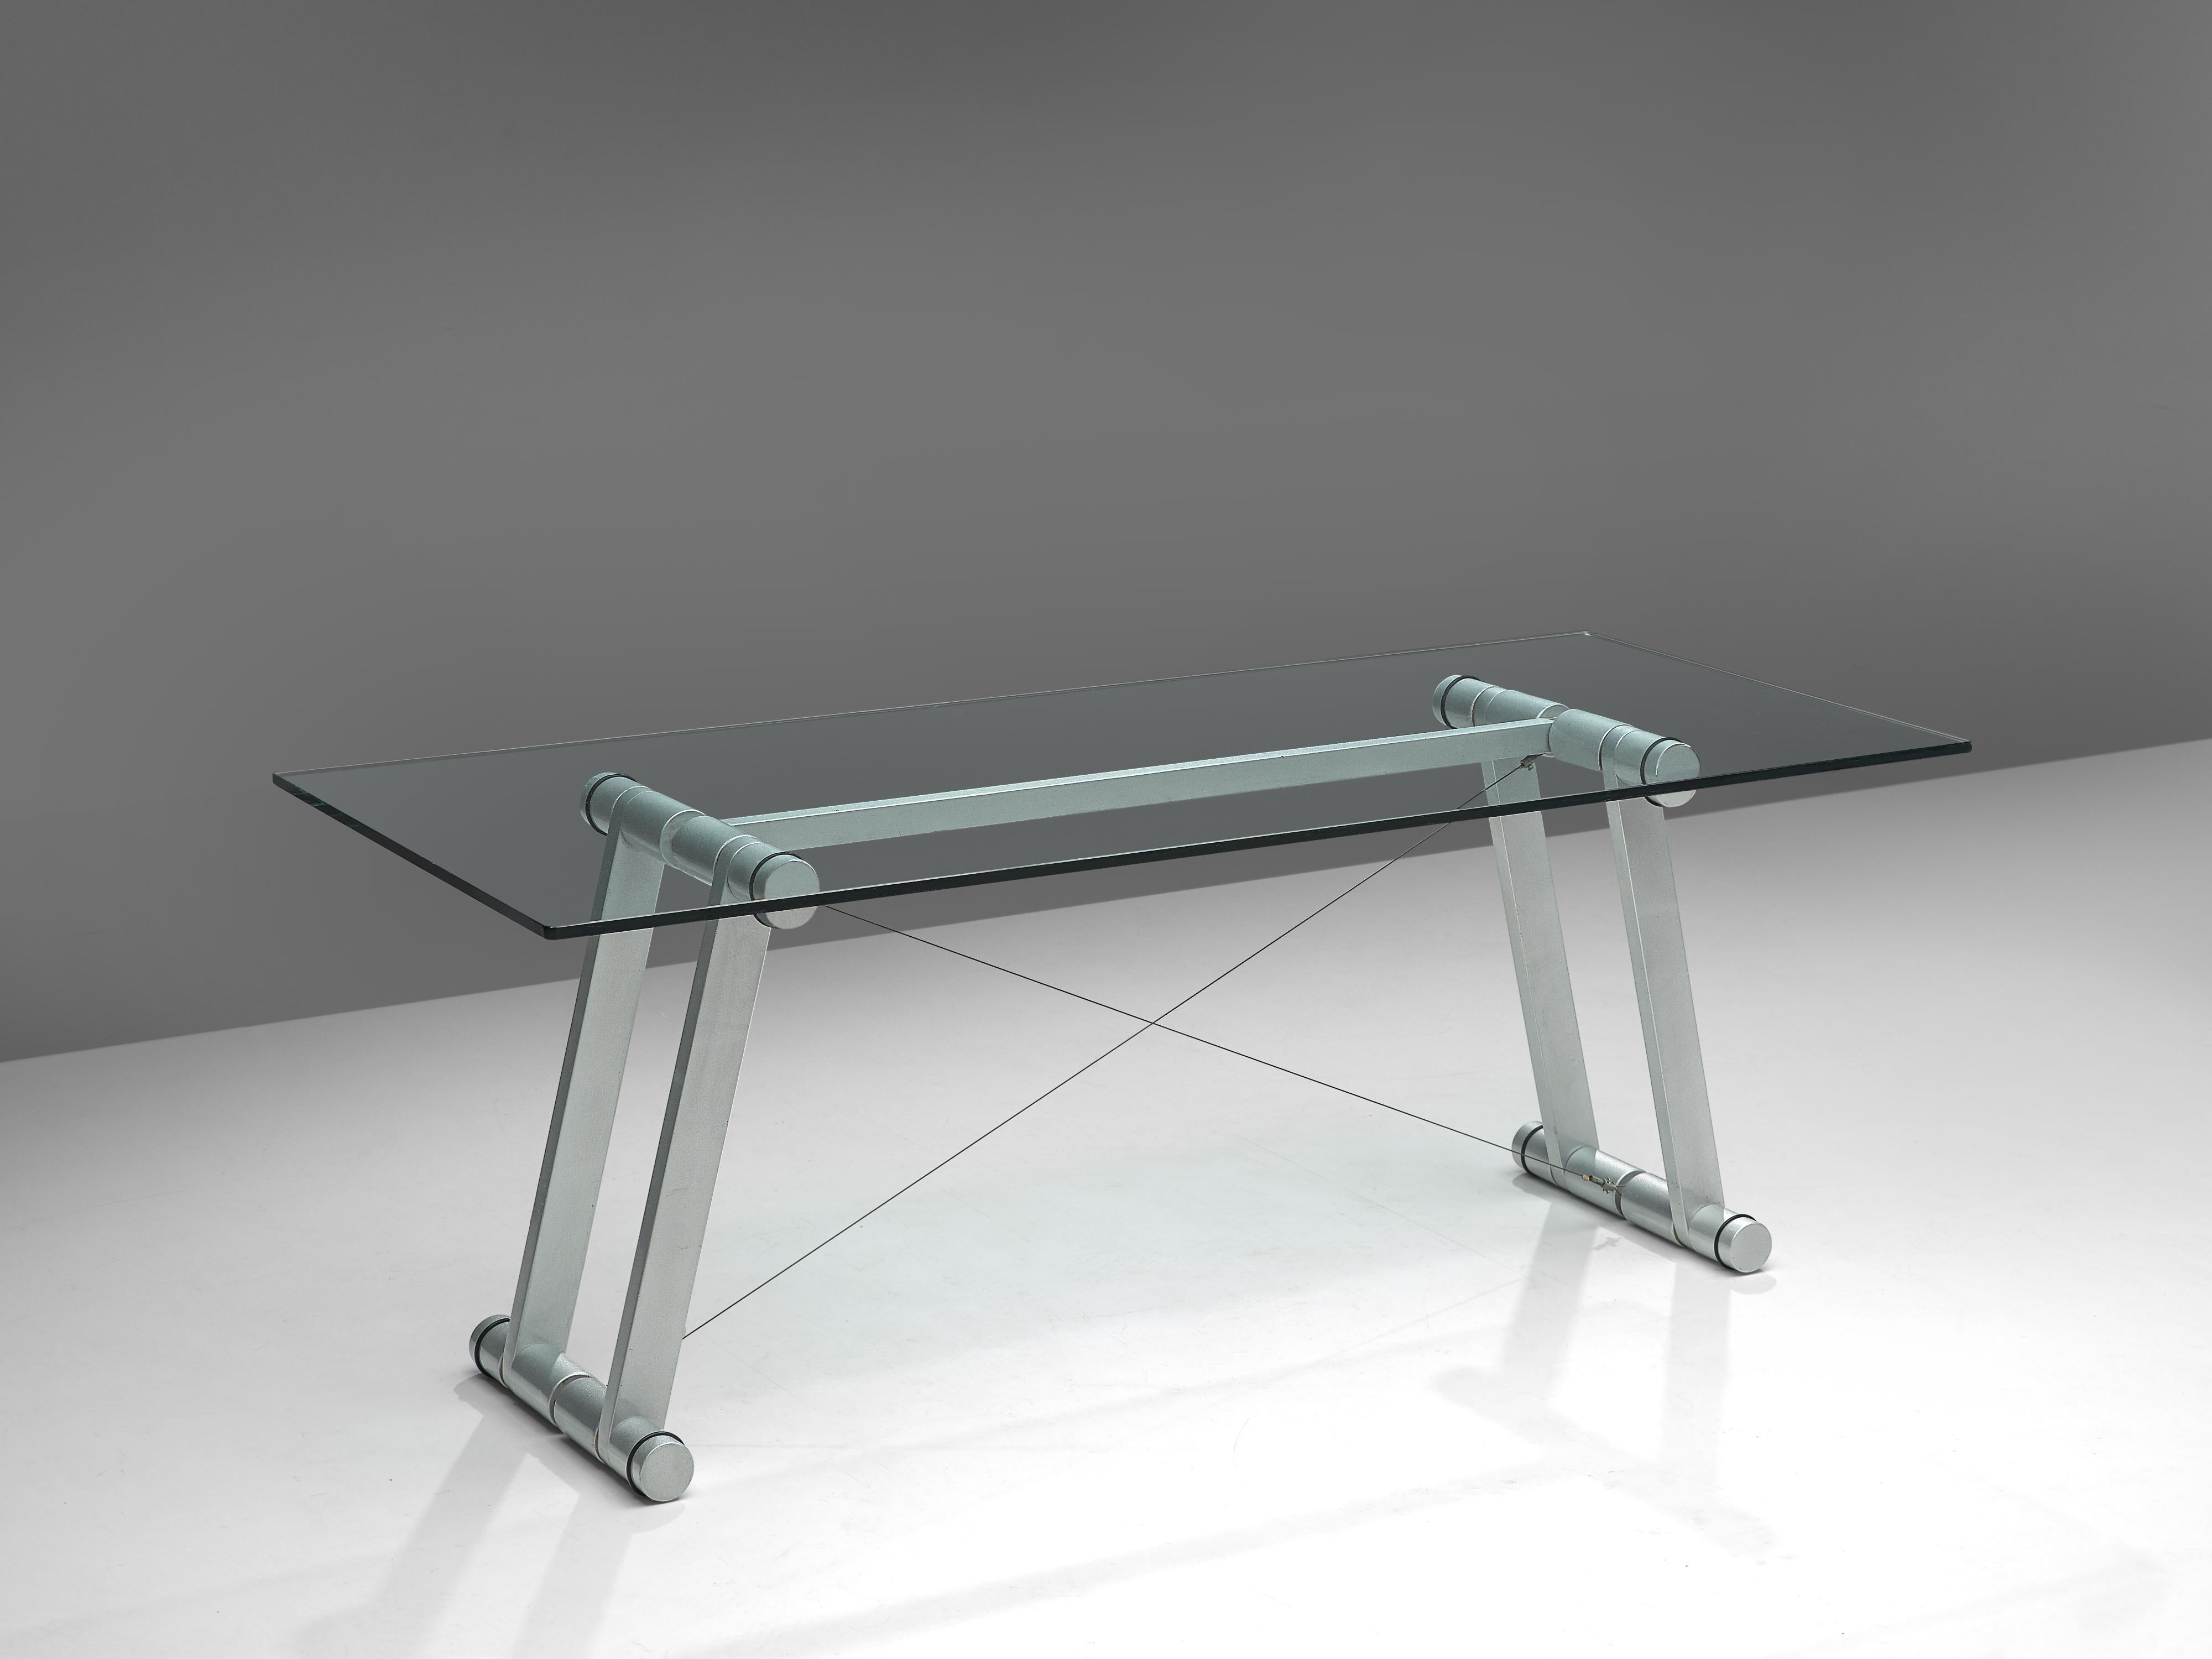 Superstudio, dining table 'Teso', metal, glass, Italy 1970s

Exceptional table by the Italian architecture and design group Superstudio. The rectangular table has a clear glass top. The frame consist of four large tubular legs executed in metallic